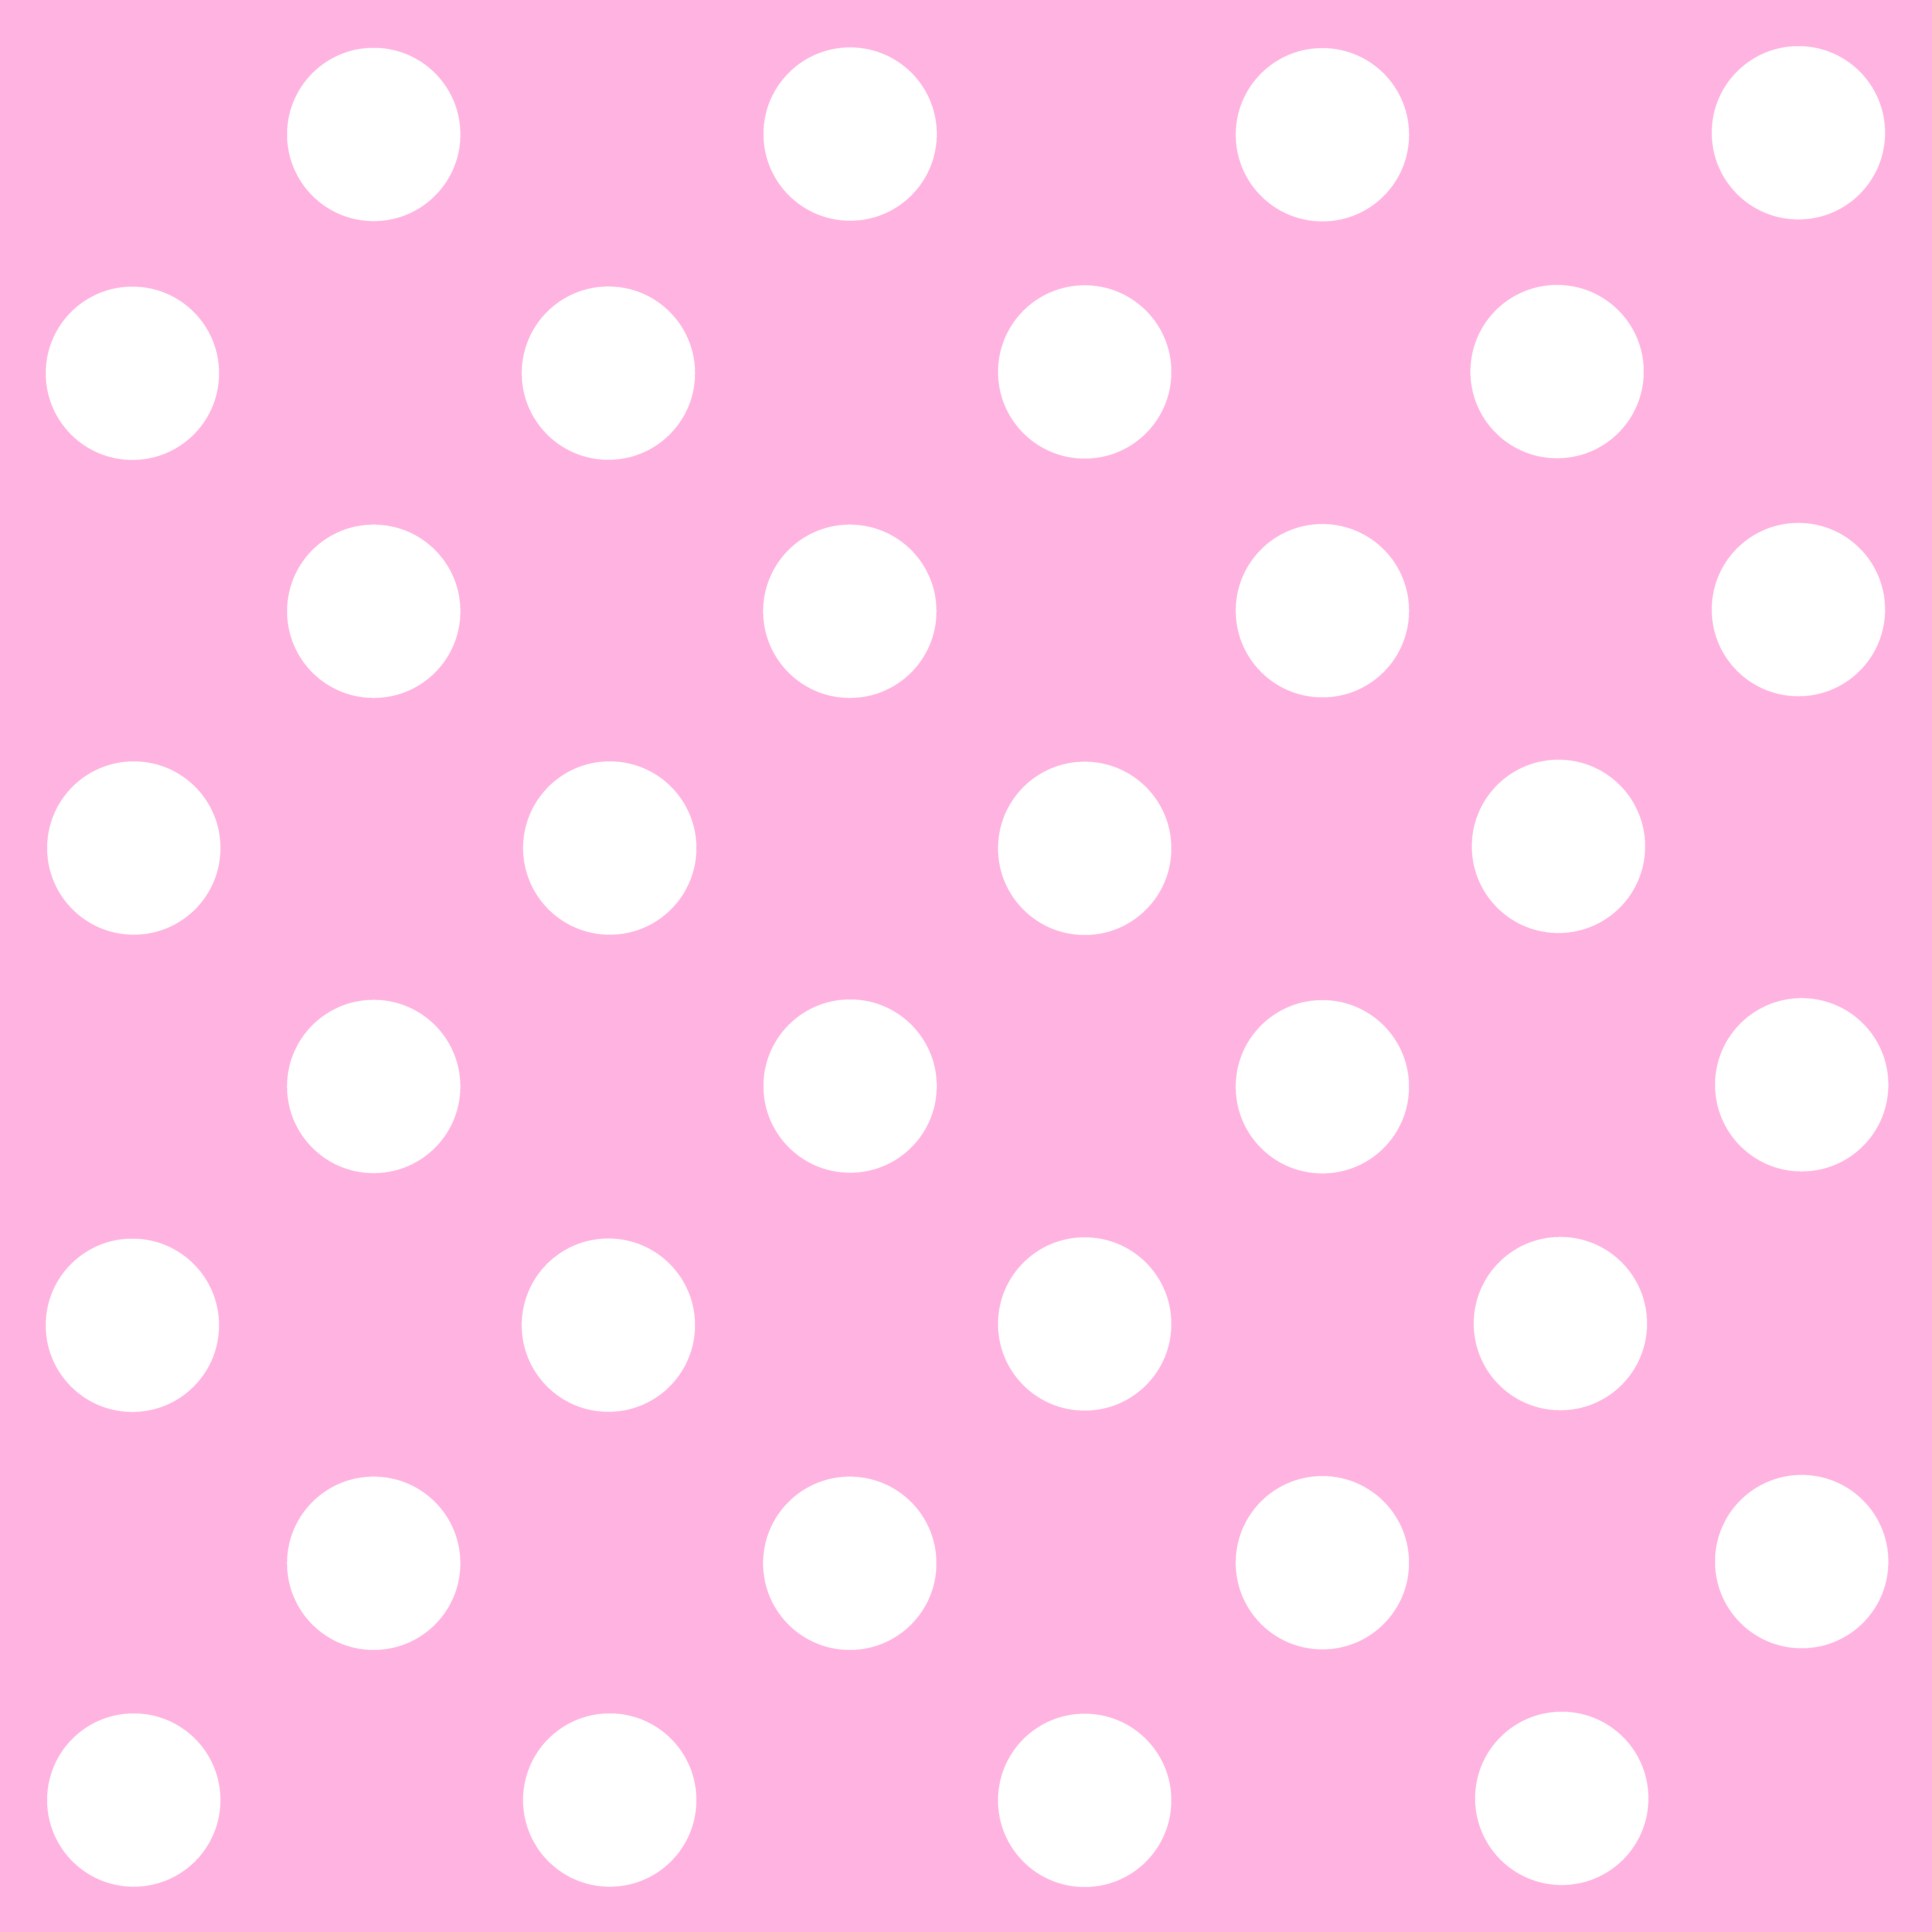 Wallpapers Pink And White Polka Dot Dots Pattern Free Clip Art #2 ...